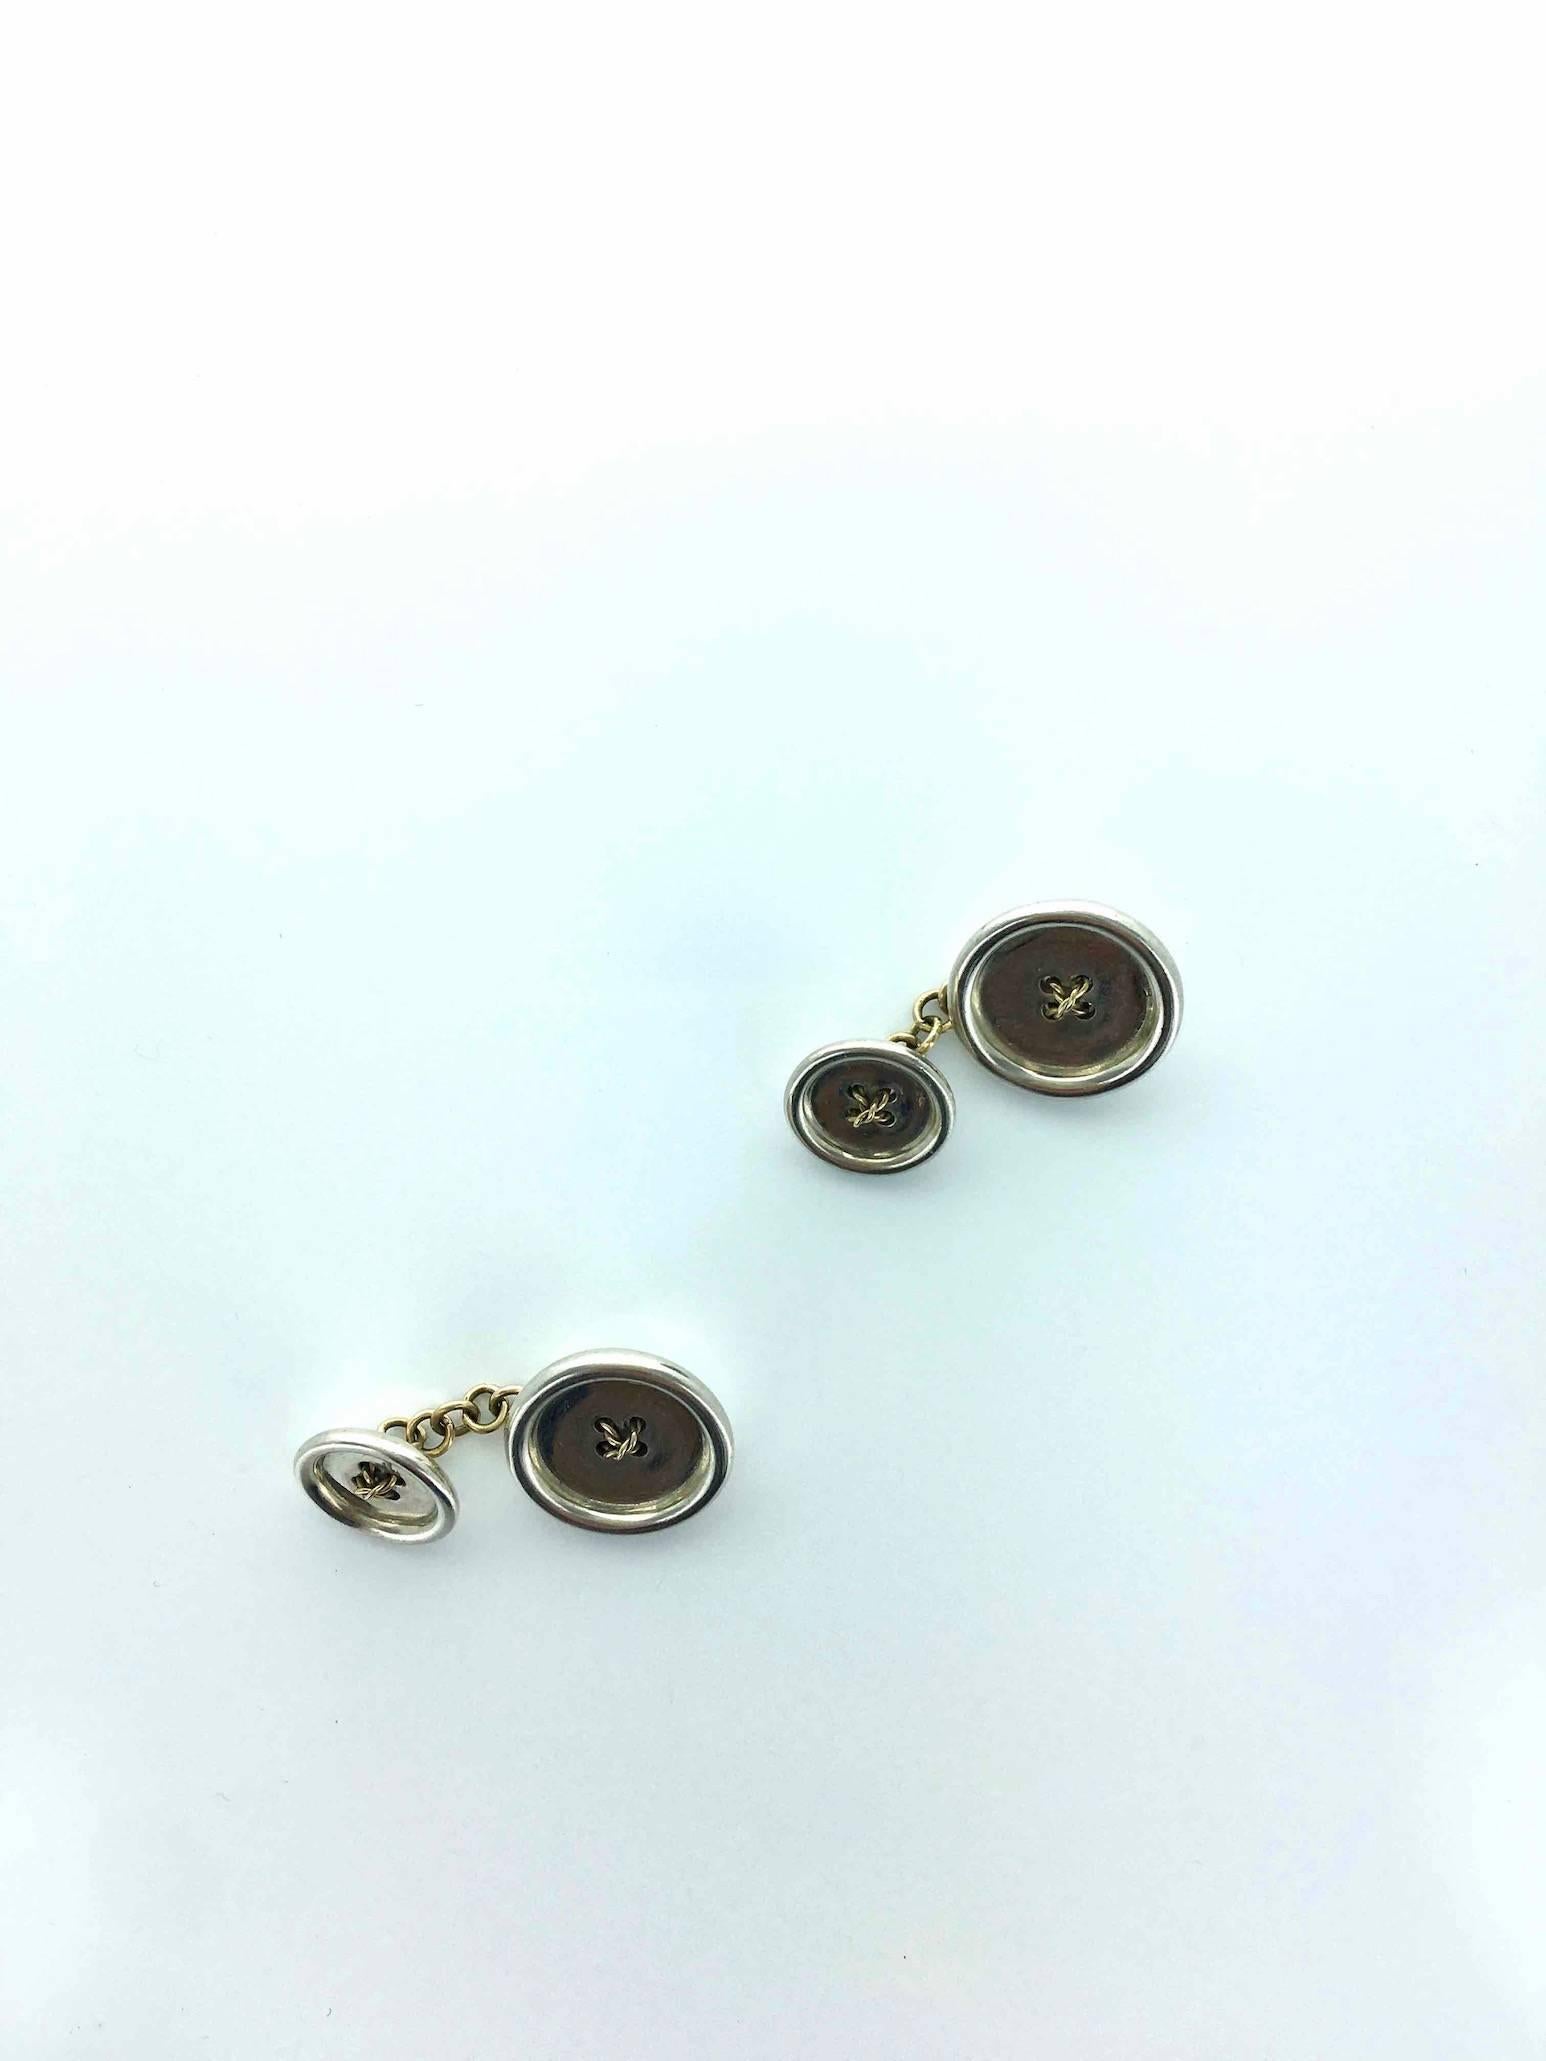 So simple and so Chic! Those cufflinks imitate perfectly classical shirt buttons.
The size and volume are ideal.

In silver and yellow gold 18k 750.
Signed Bulgari (each piece).
Diameter: Big button: 0.71 inch. (1.80 centimeters)
Small button: 0.51